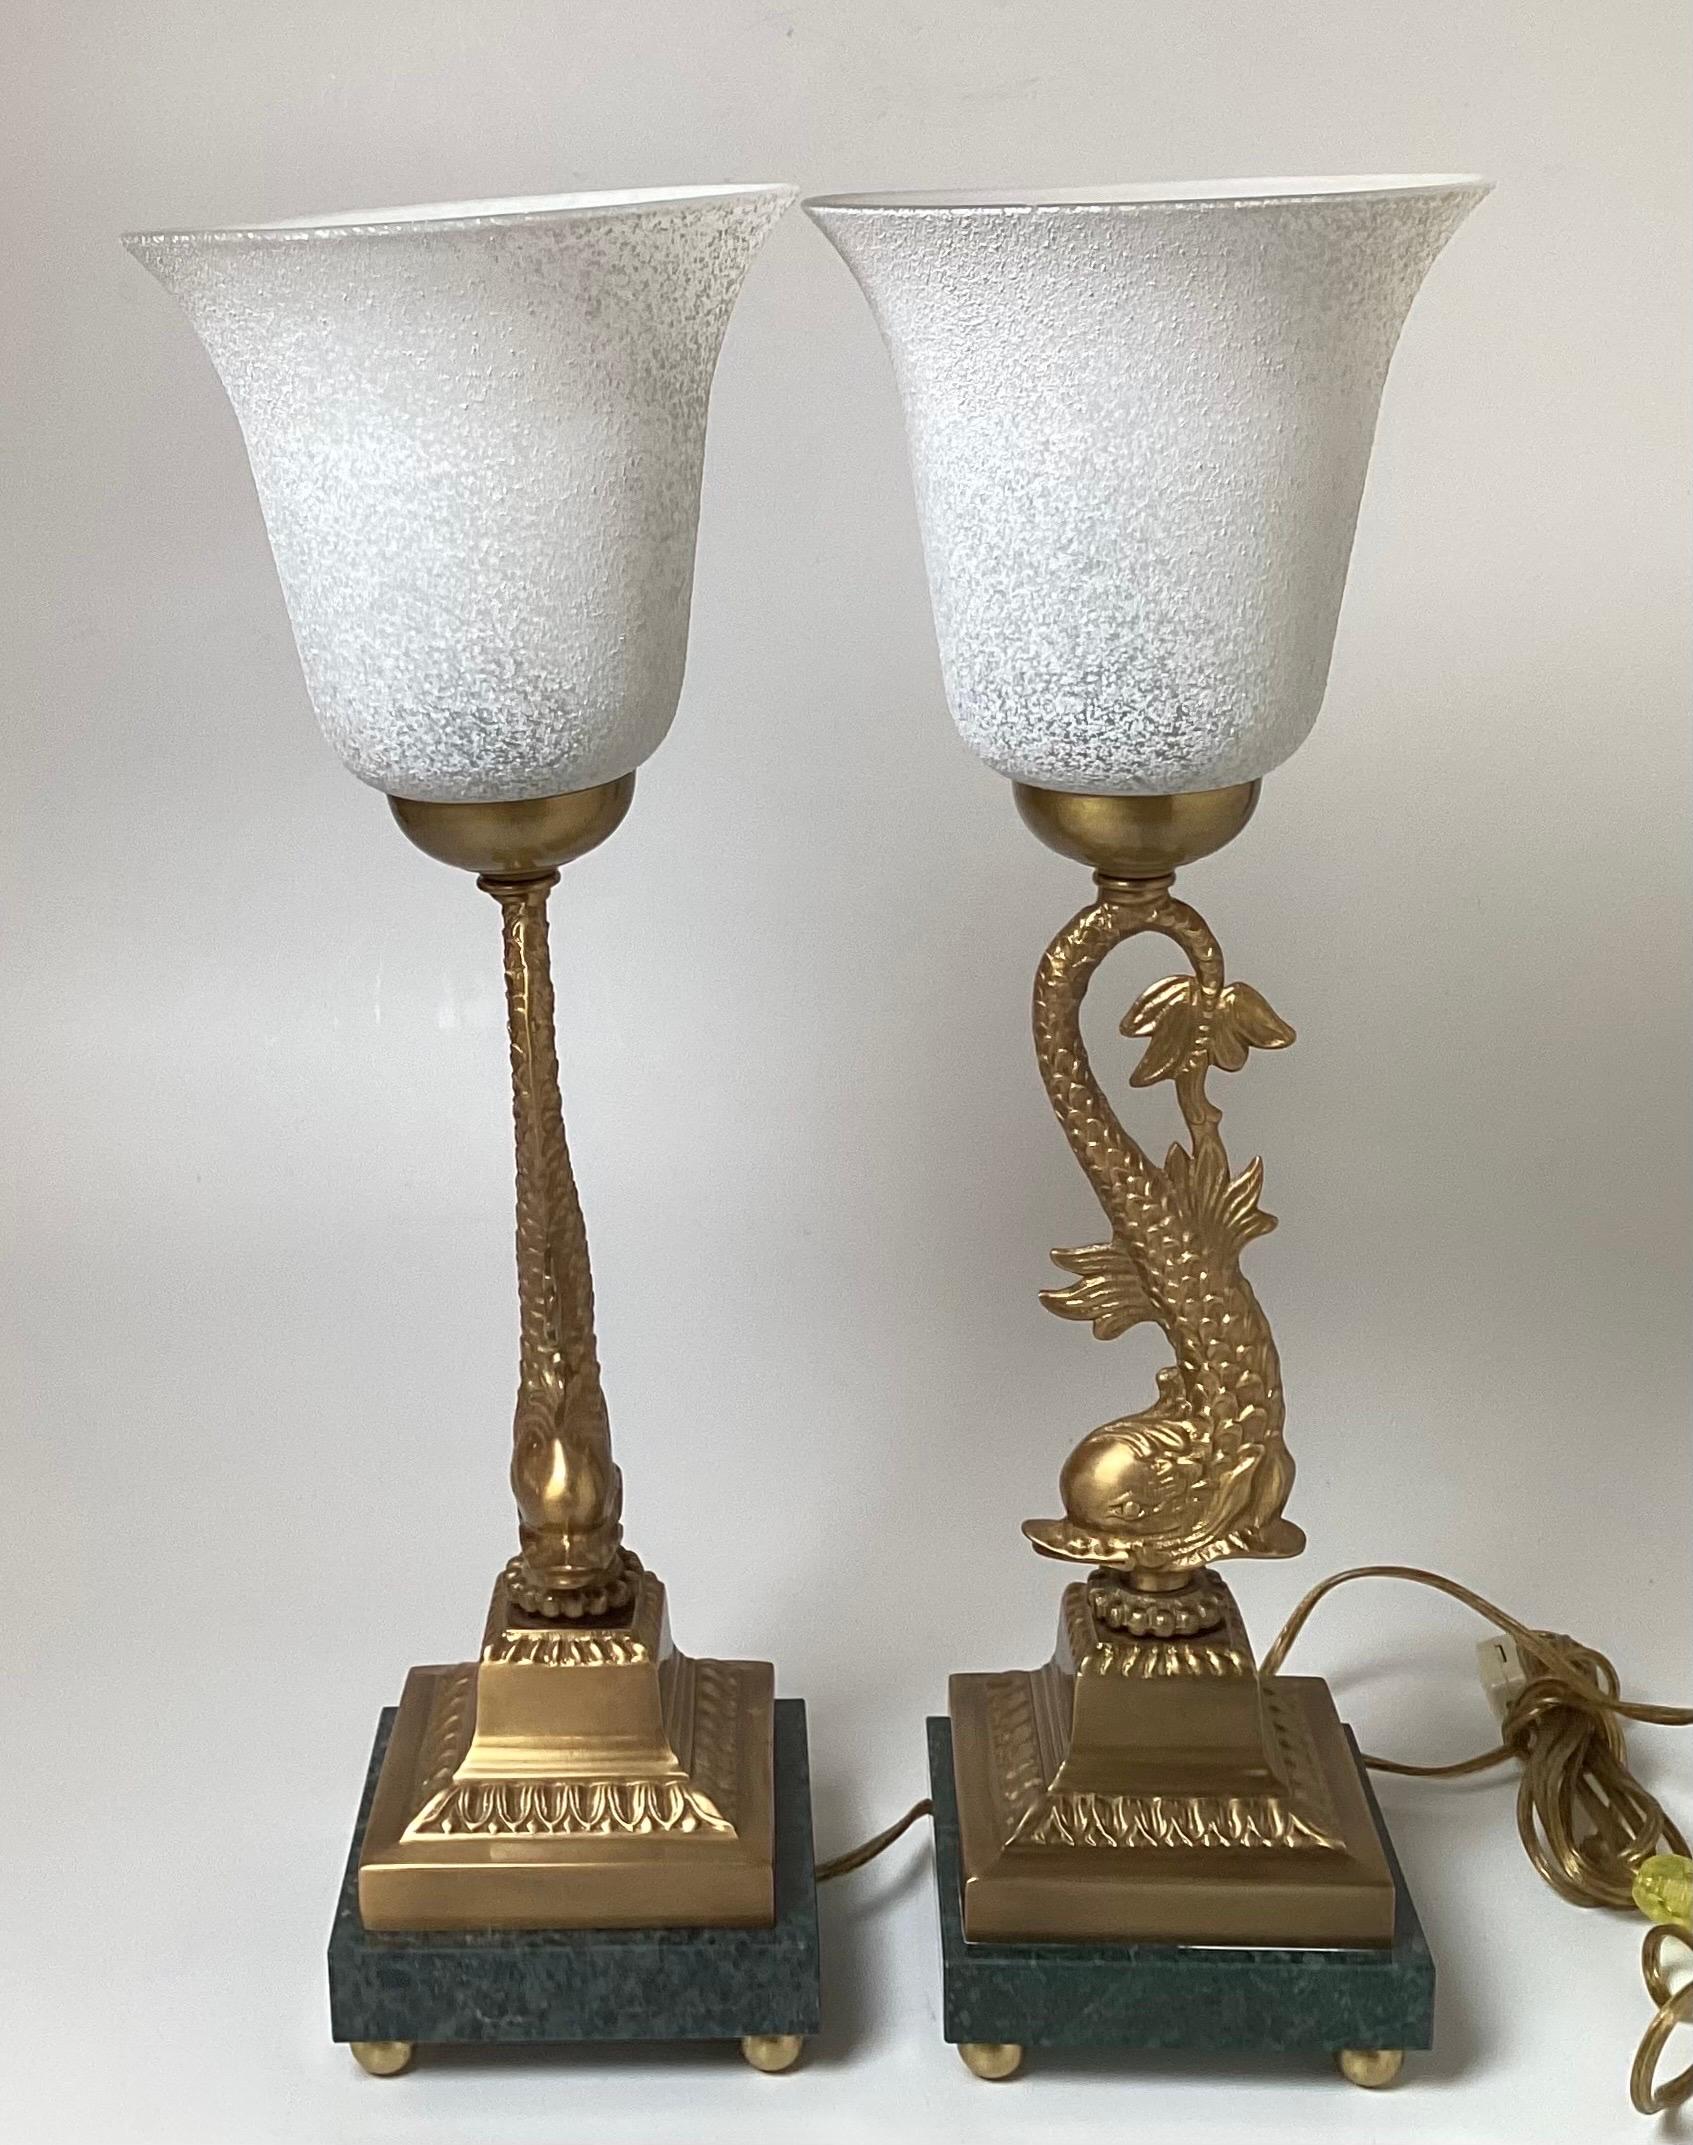 A Pair of cast brass and marble dolphin motif buffet laps with frosted white glass shades. The lamps are 19 inches tall tot he top of the shades and 6.5 inches in diameter at the top, with a 5.5 inch square base. The on-off switch is on the cord.